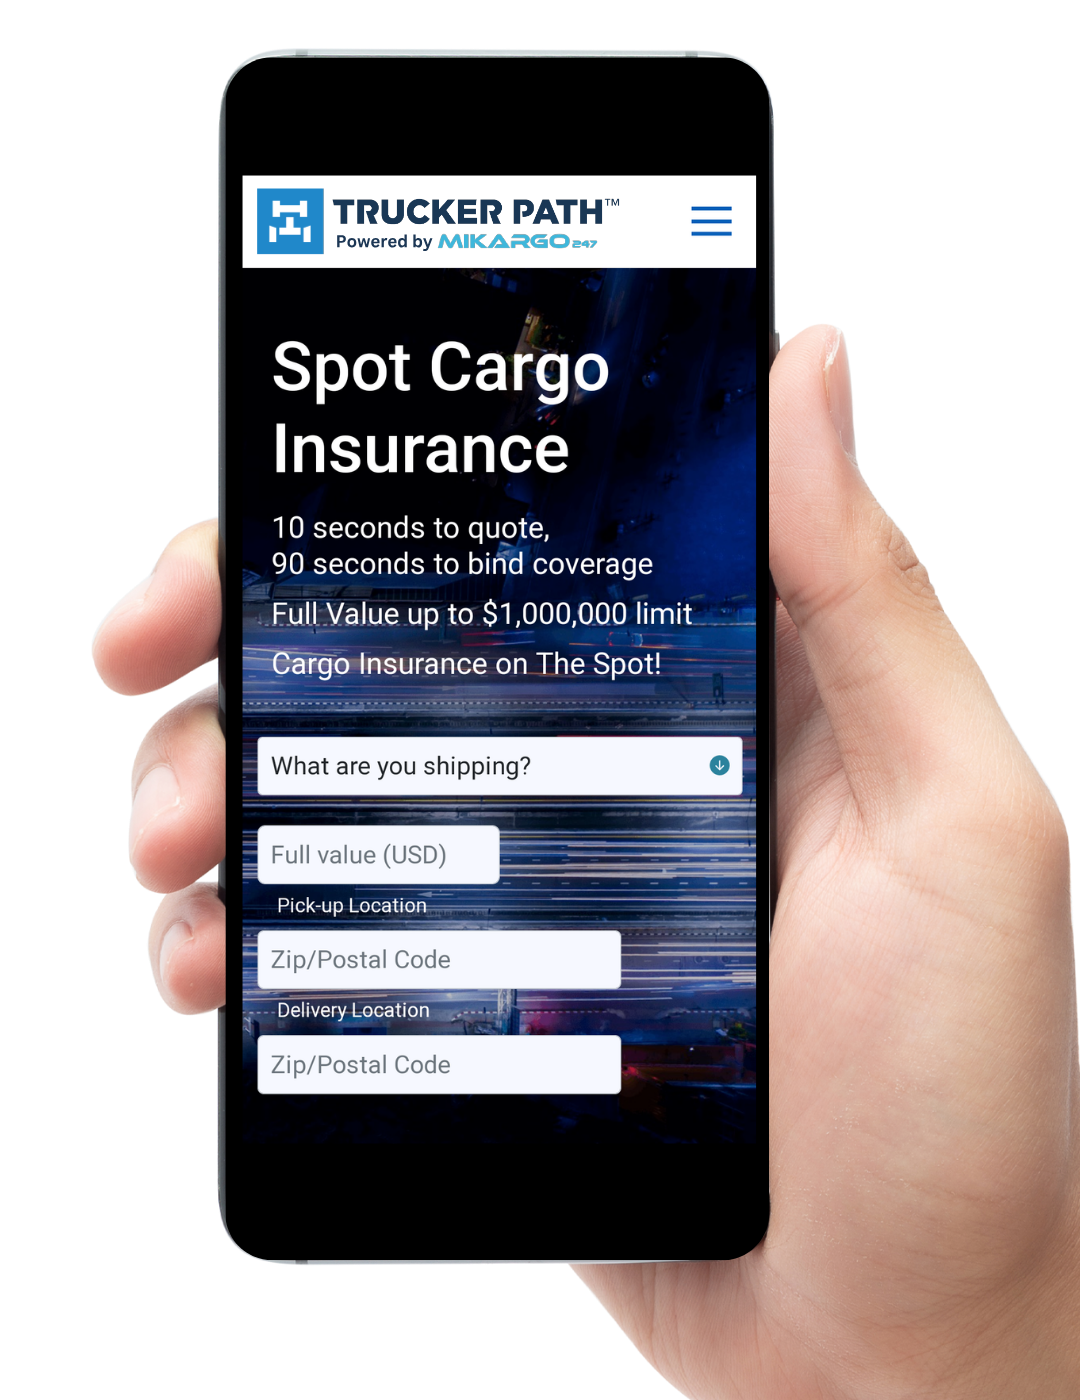 Trucker Path Provides Quick Access to Spot Cargo Insurance for App Users